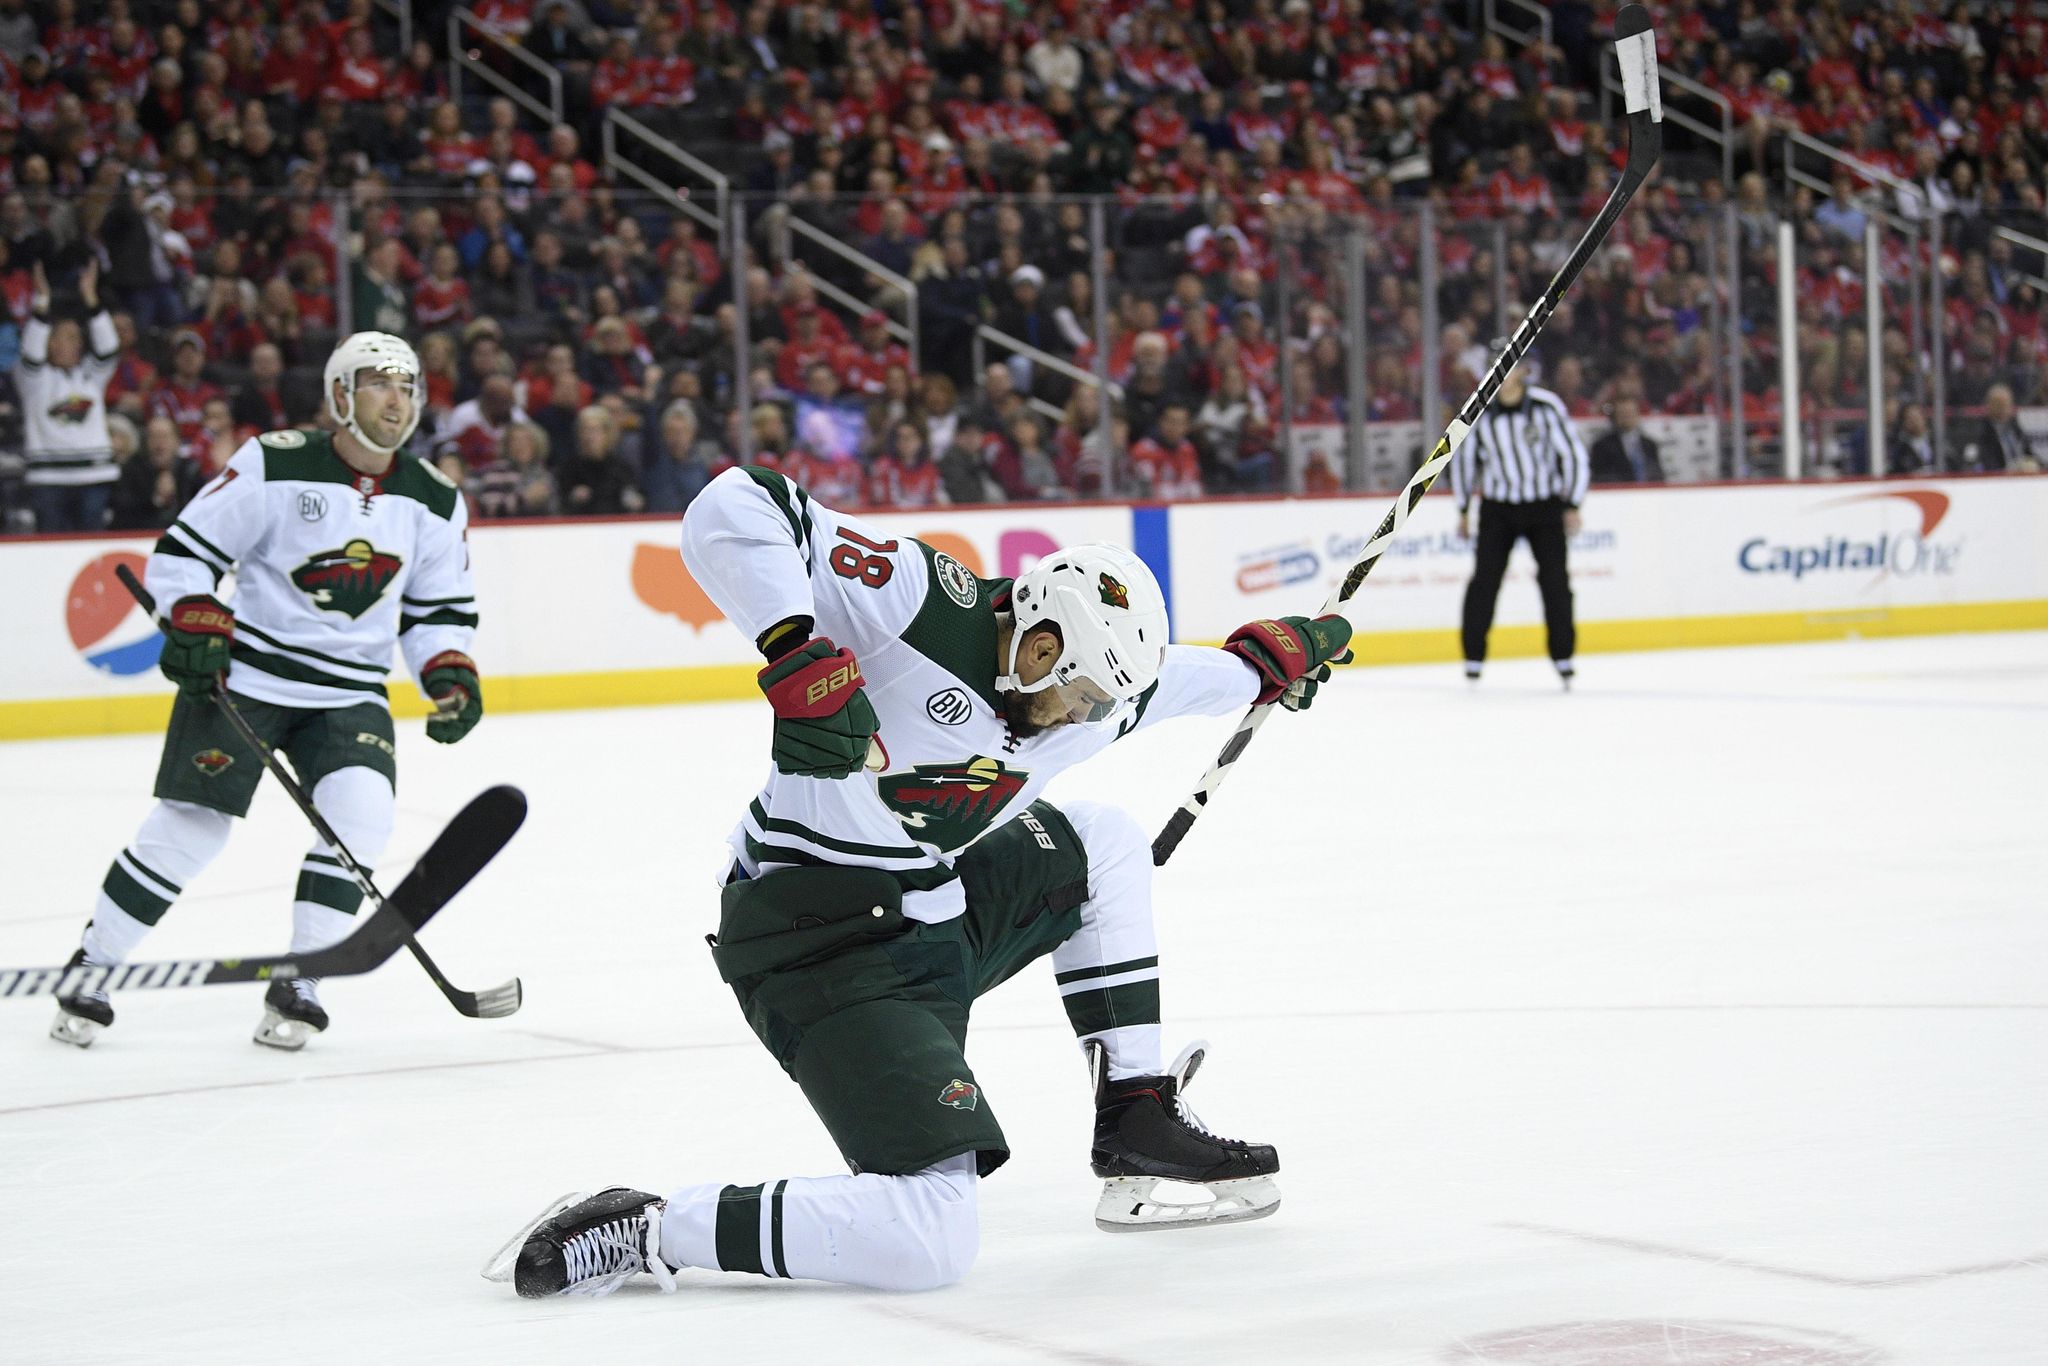 Wild edge Capitals 2-1 to move into playoff position